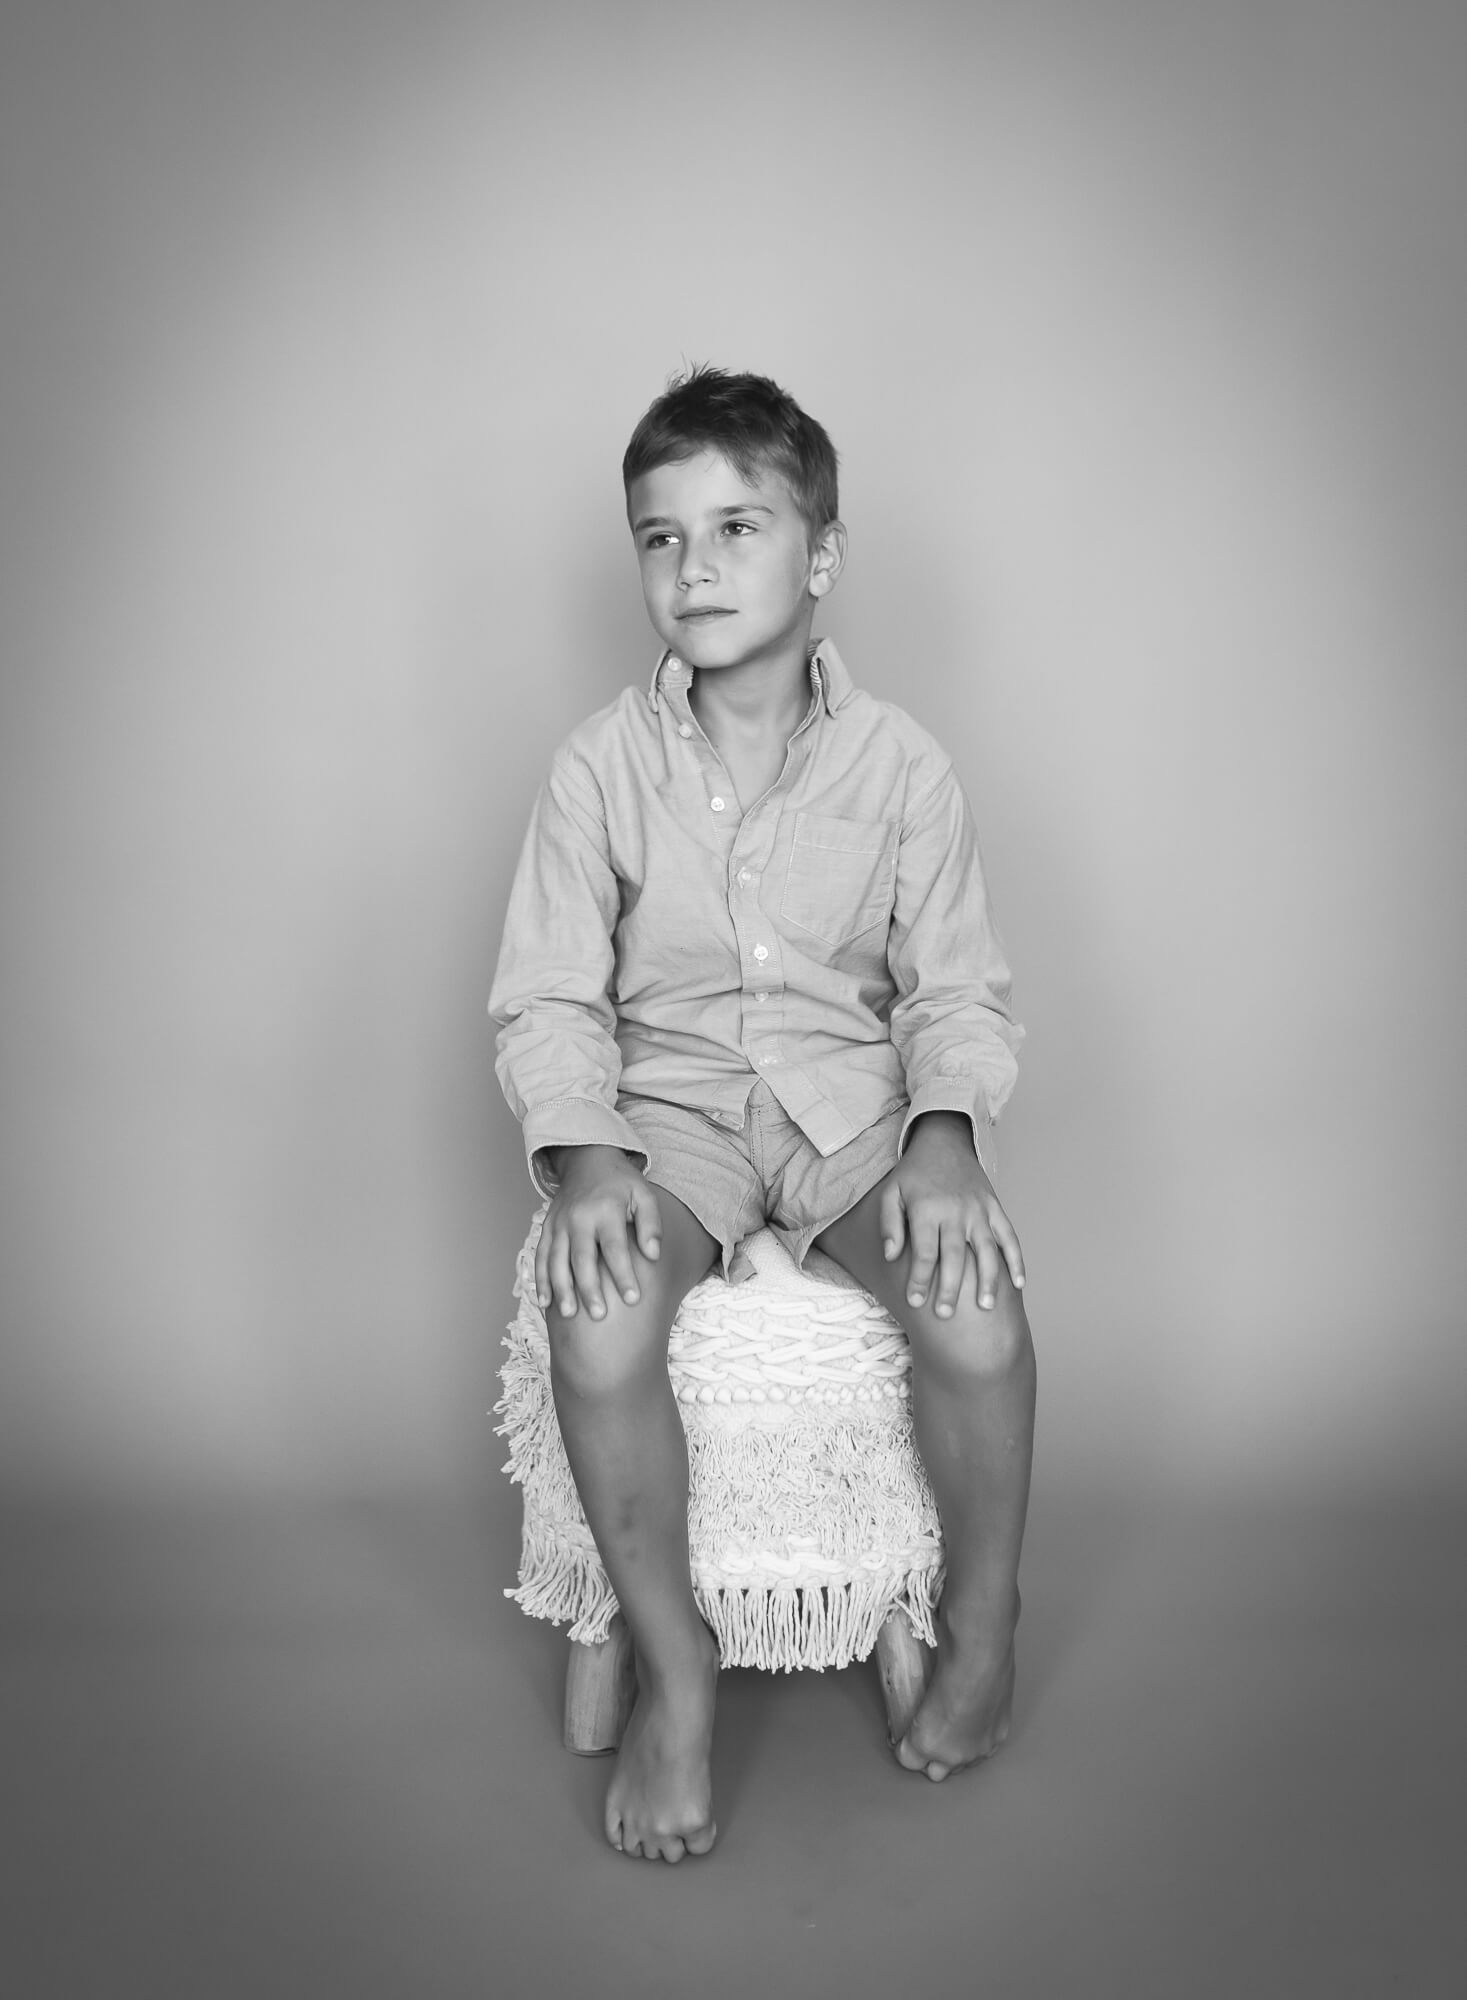 stunning black and white studio portrait of young boy on a boho stool with a timeless feel